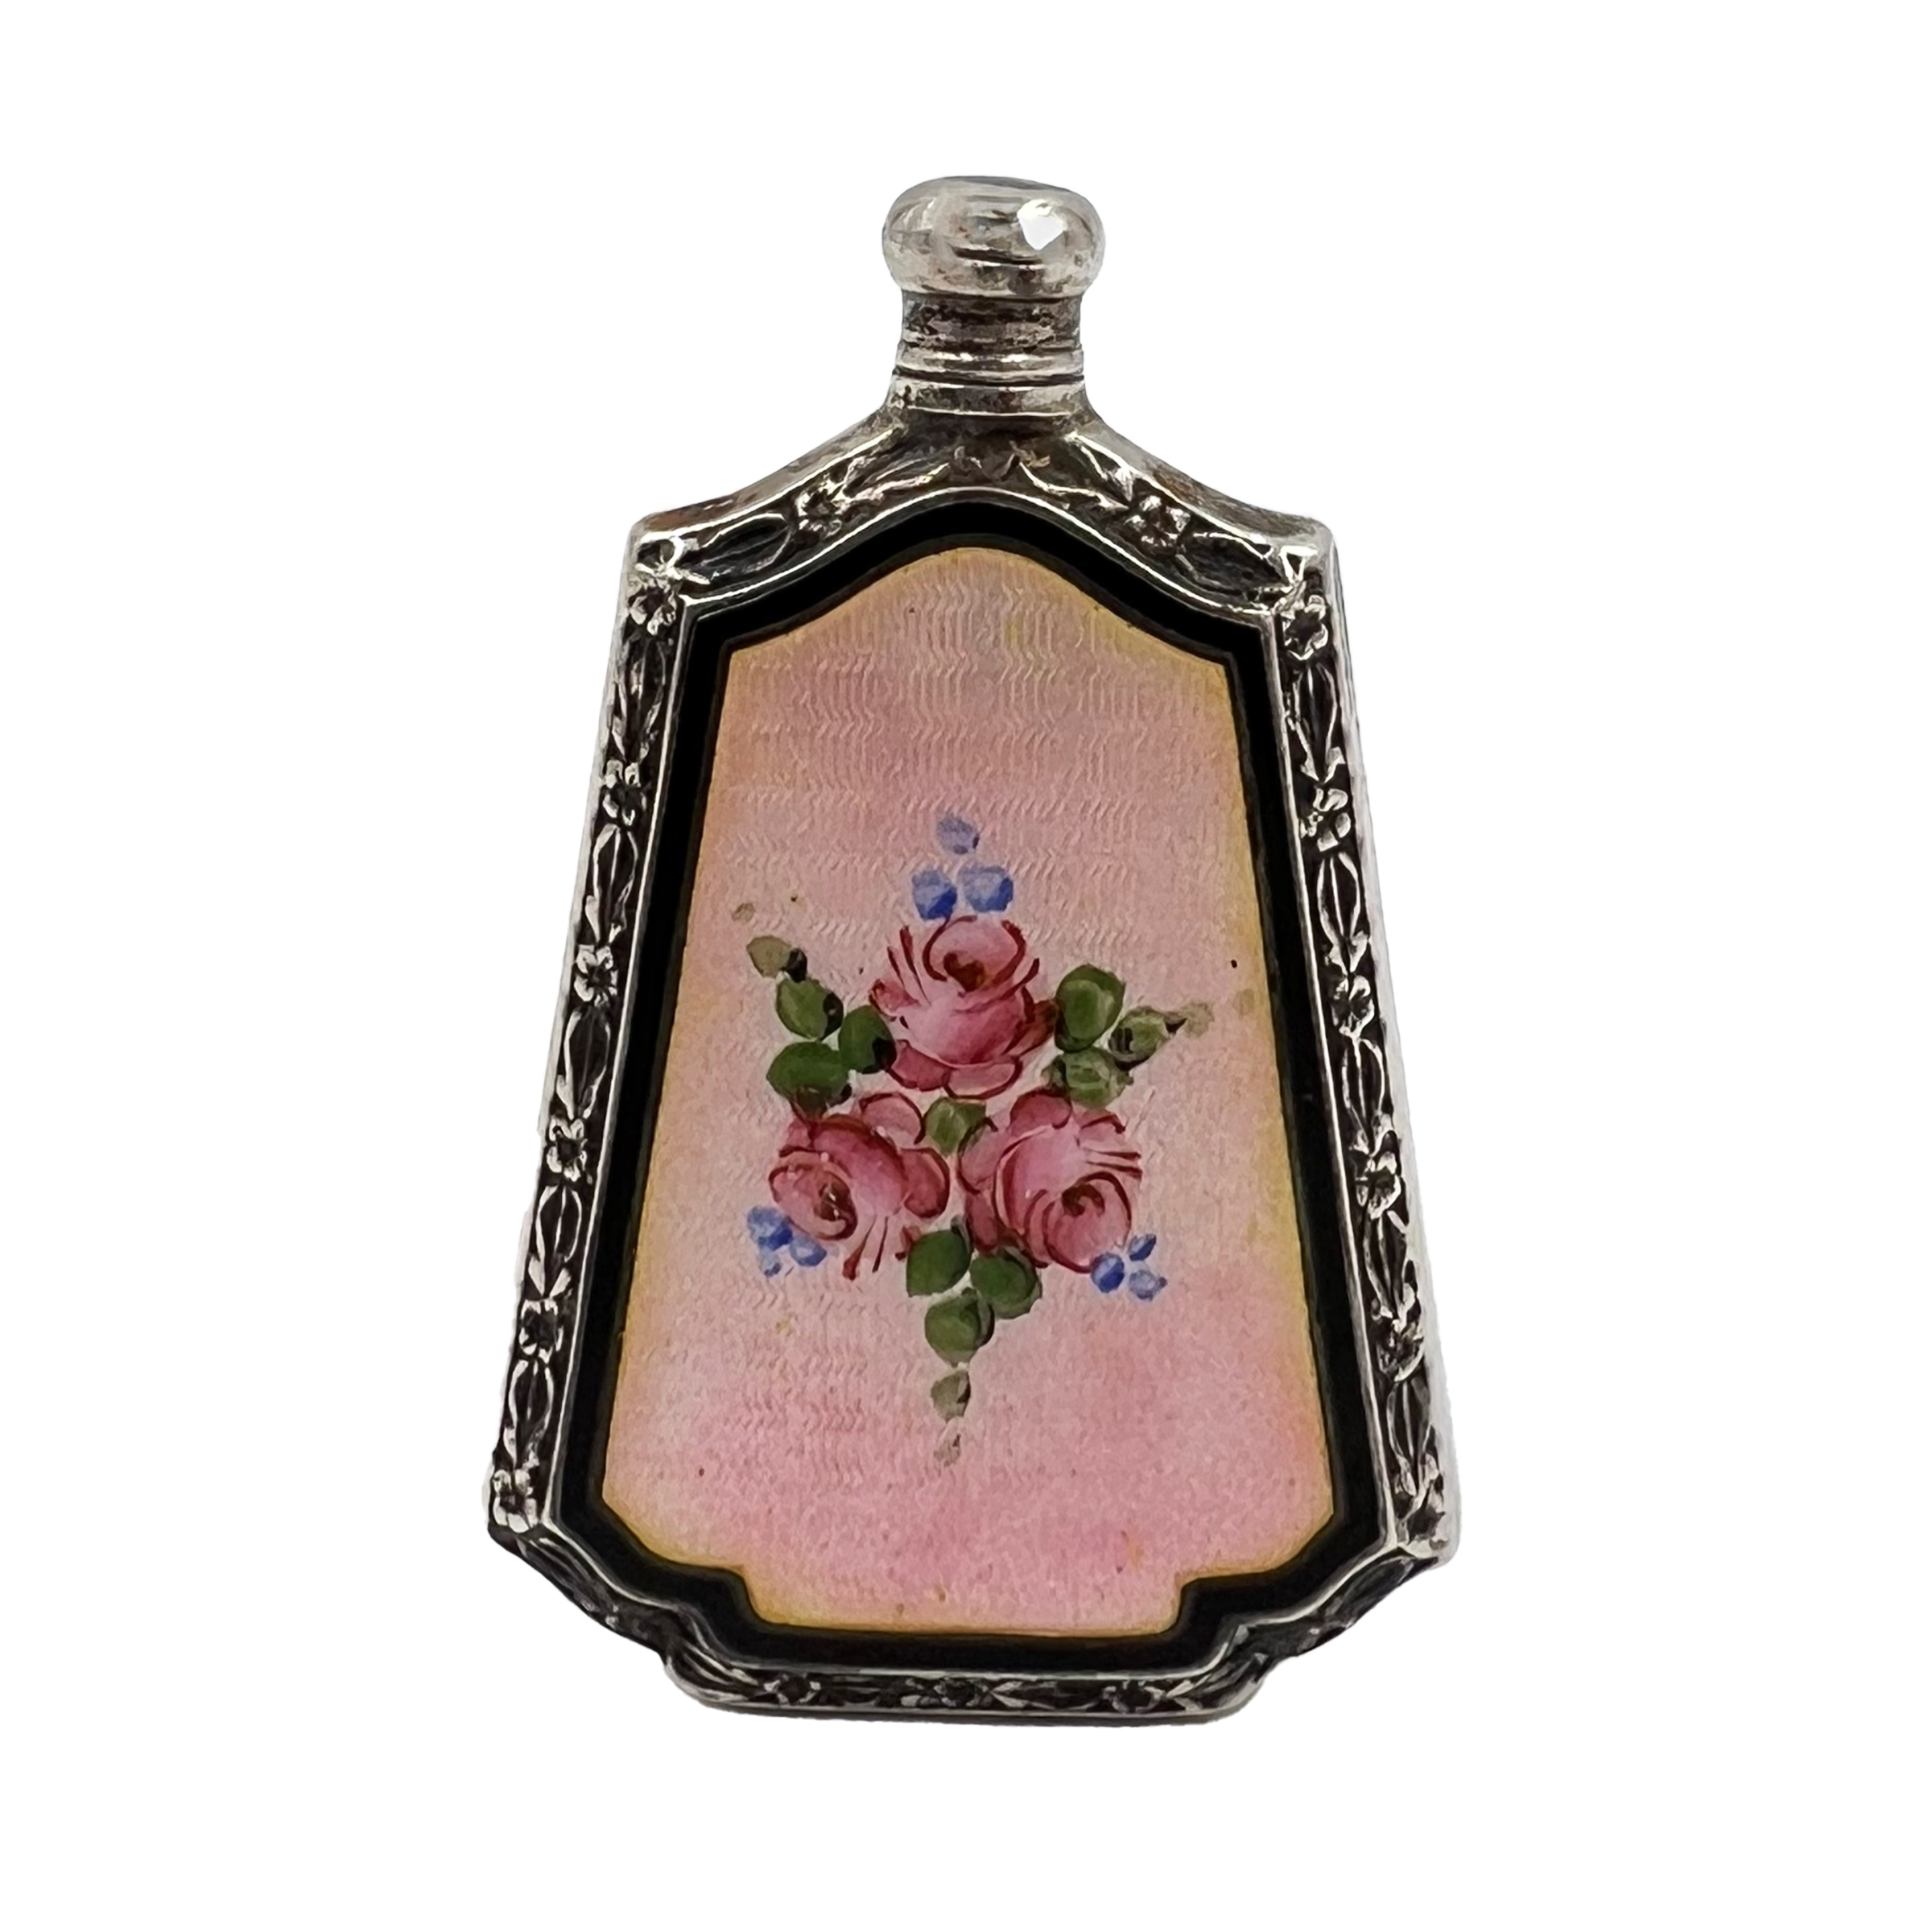 A CONTINENTAL STERLING SILVER AND ENAMEL SCENT BOTTLE.